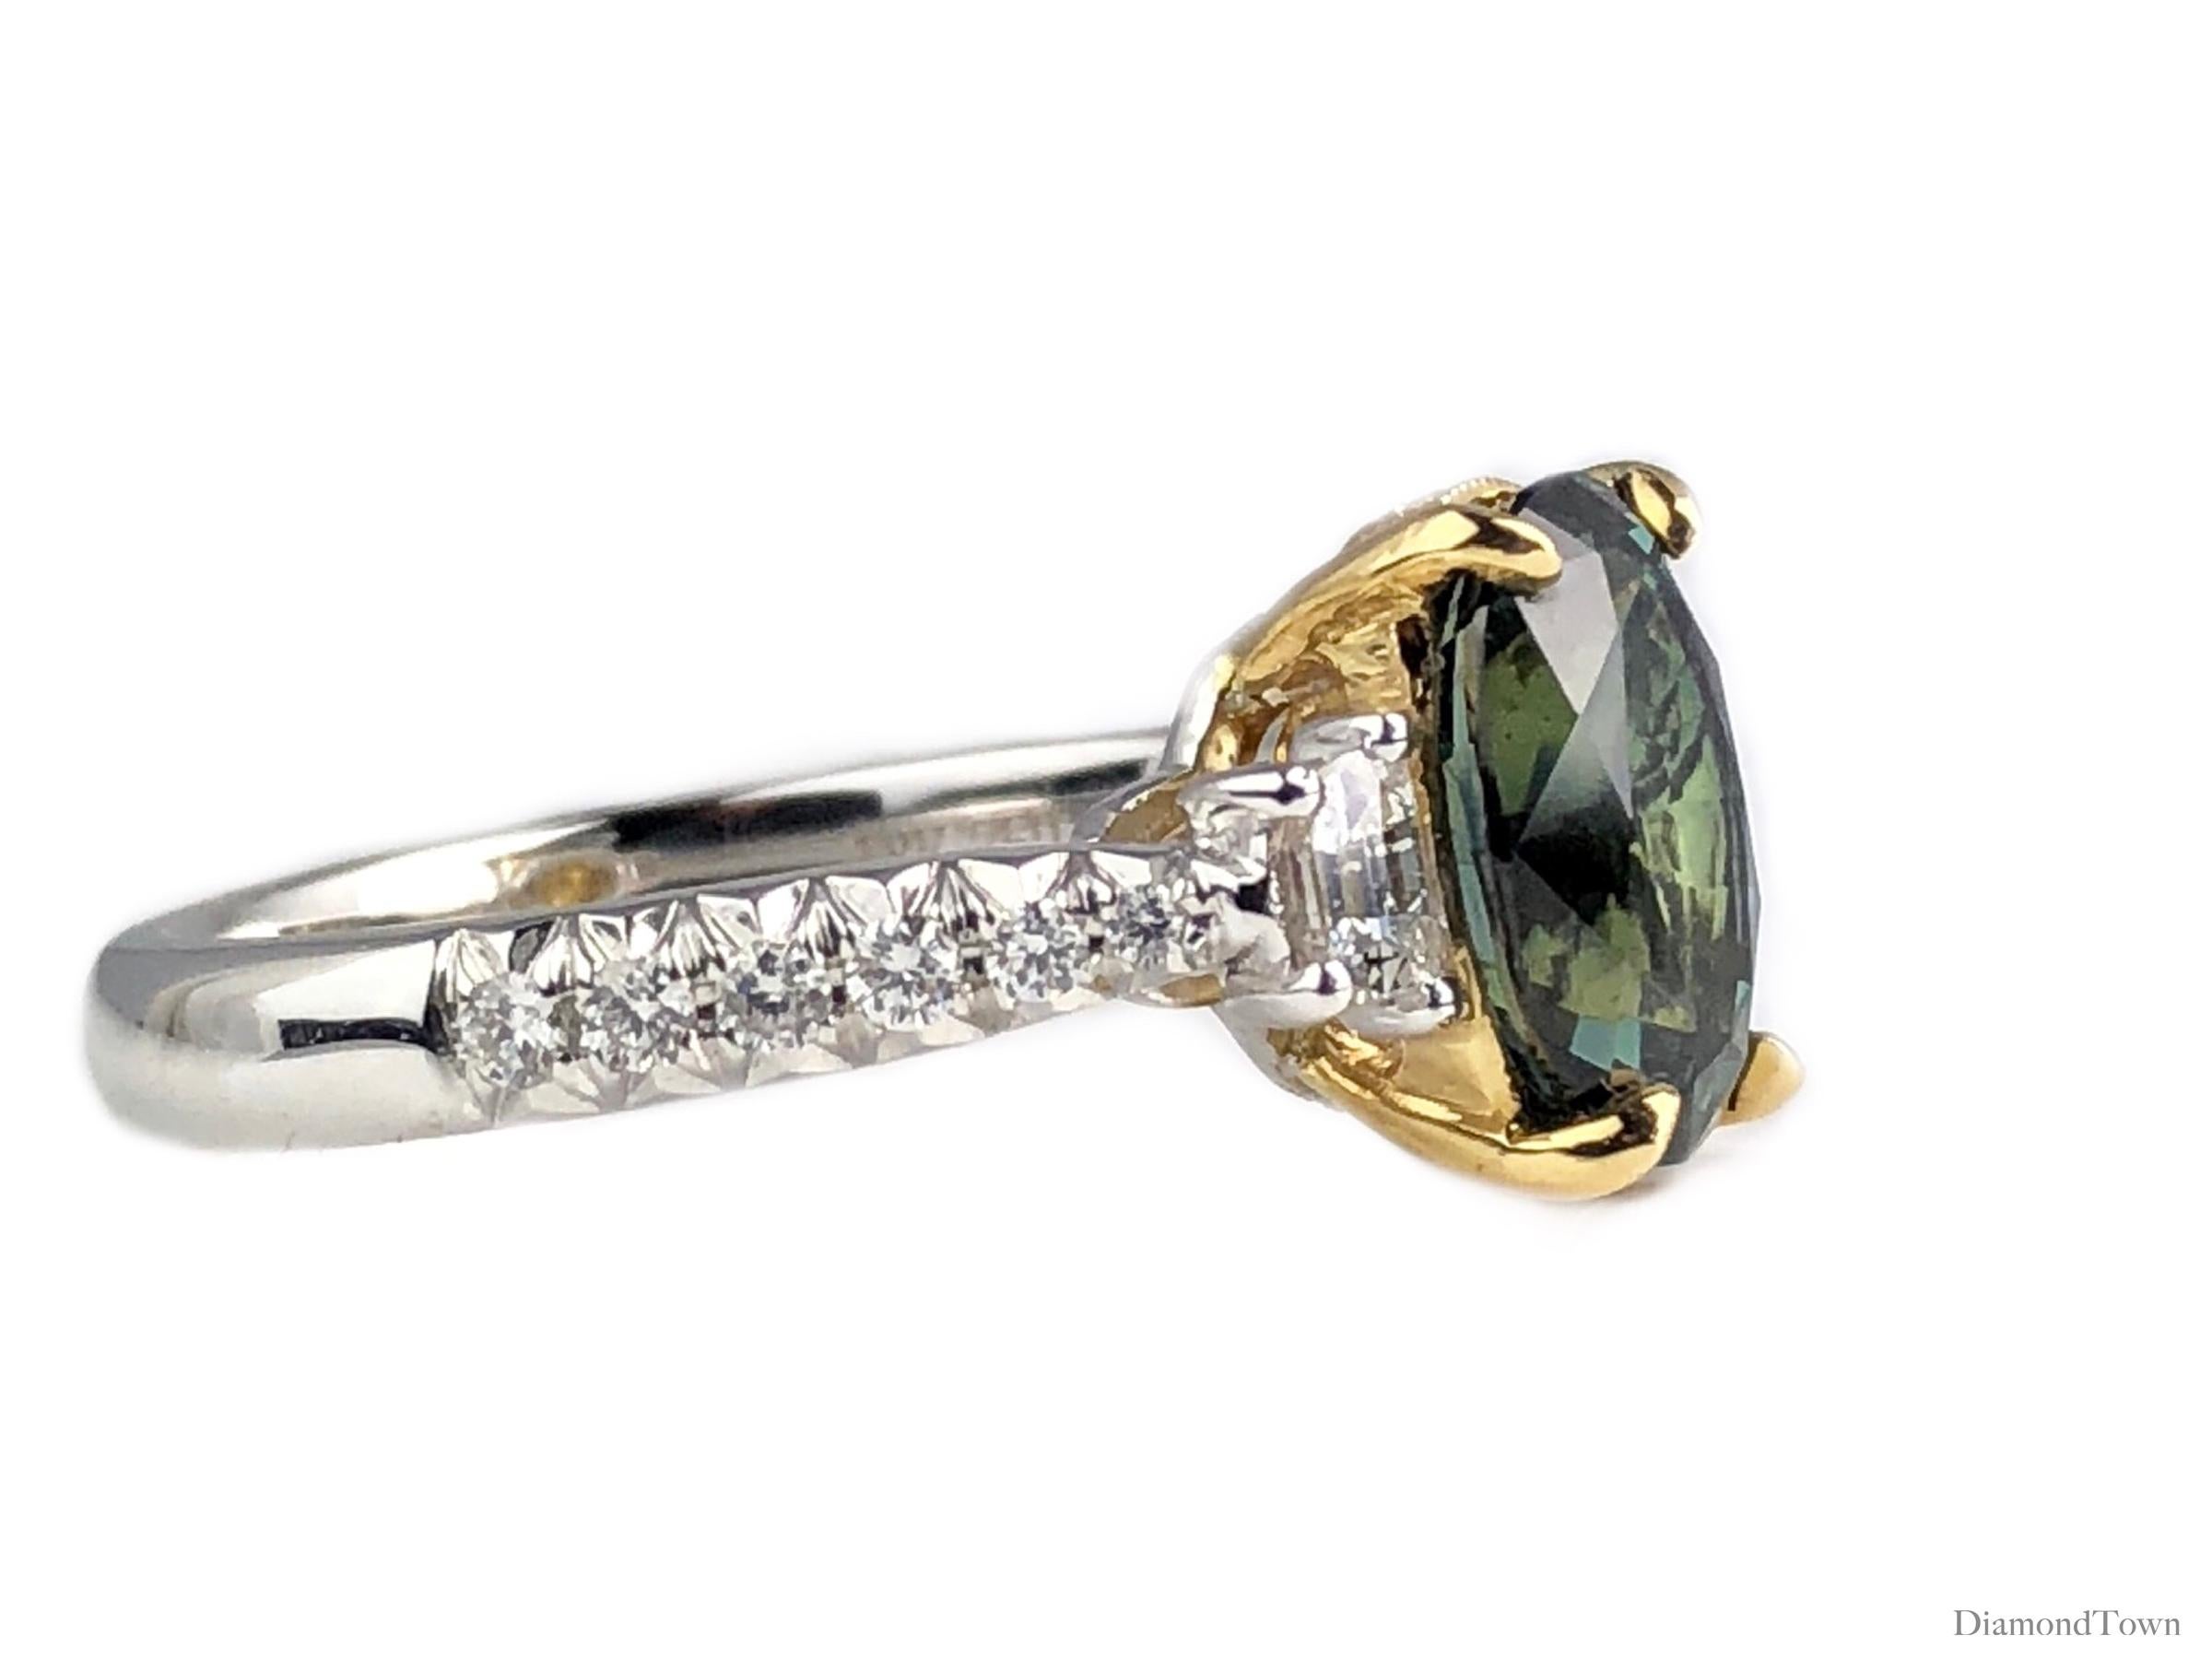 This ring features an exotic 2.90 carat oval cut Forest Green Sapphire center, flanked by half moon diamonds and additional diamonds extending down the side shank (total diamond weight 0.57 carats). An accent of yellow gold and some milgrain work in